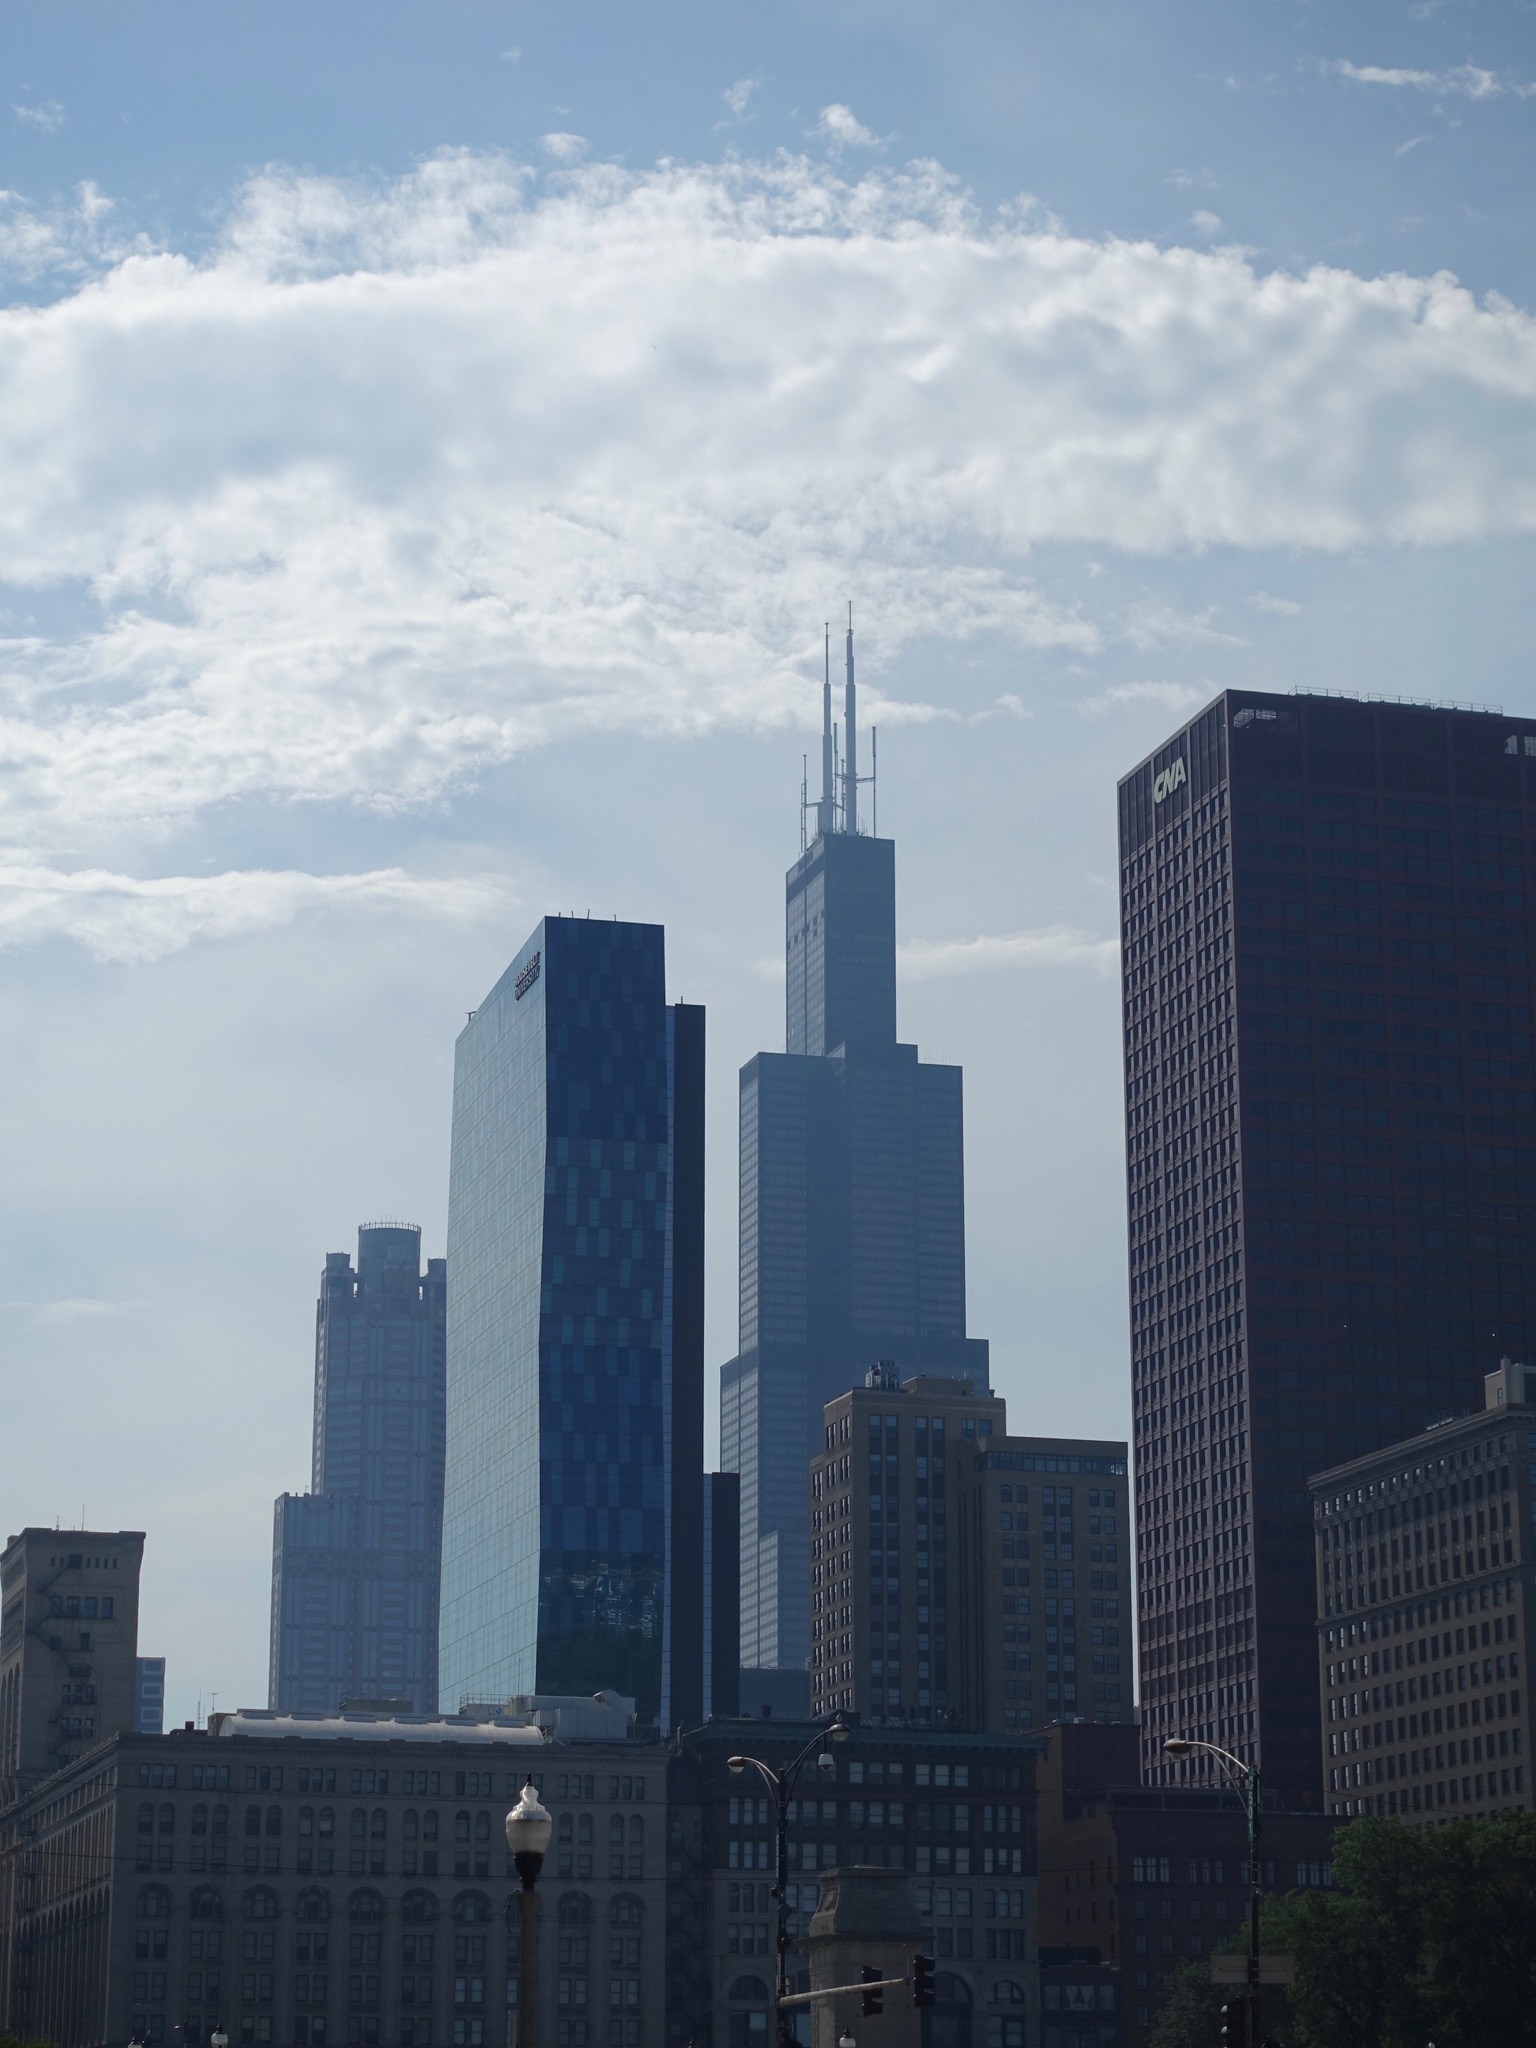 Photo 58 of 135 from the album Highlights Chicago 2015.